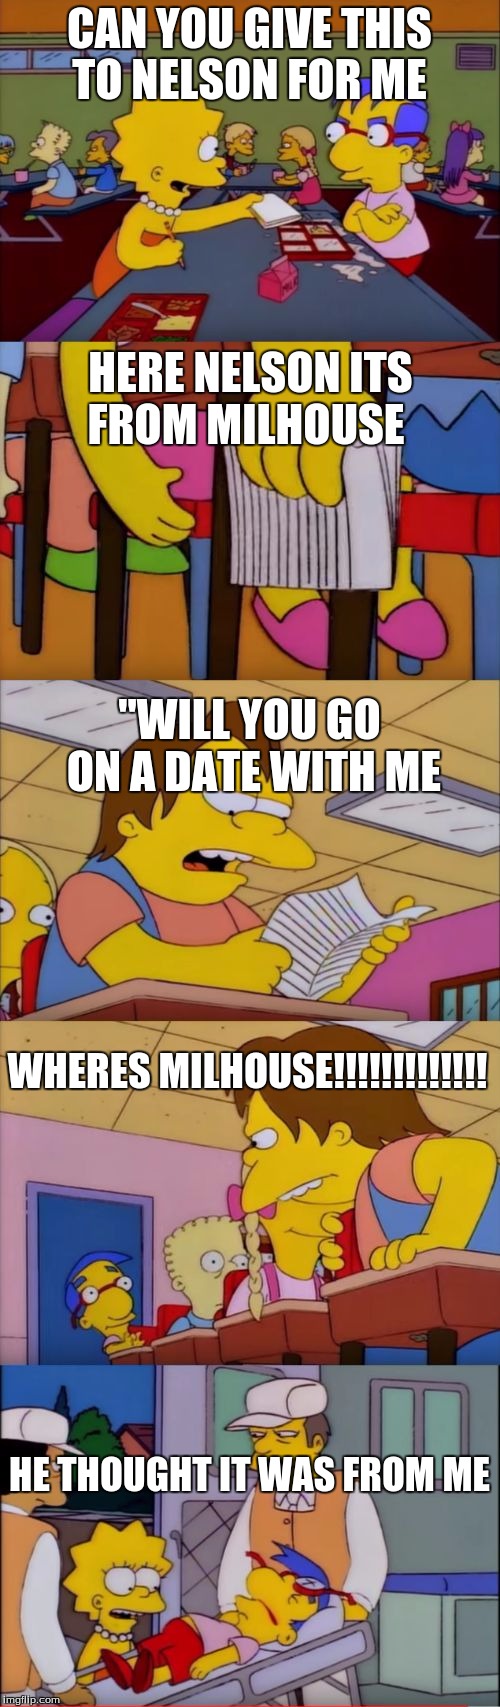 guess who likes you note nelson milhouse lisa simpsons | CAN YOU GIVE THIS TO NELSON FOR ME; HERE NELSON ITS FROM MILHOUSE; "WILL YOU GO ON A DATE WITH ME; WHERES MILHOUSE!!!!!!!!!!!!! HE THOUGHT IT WAS FROM ME | image tagged in guess who likes you note nelson milhouse lisa simpsons | made w/ Imgflip meme maker